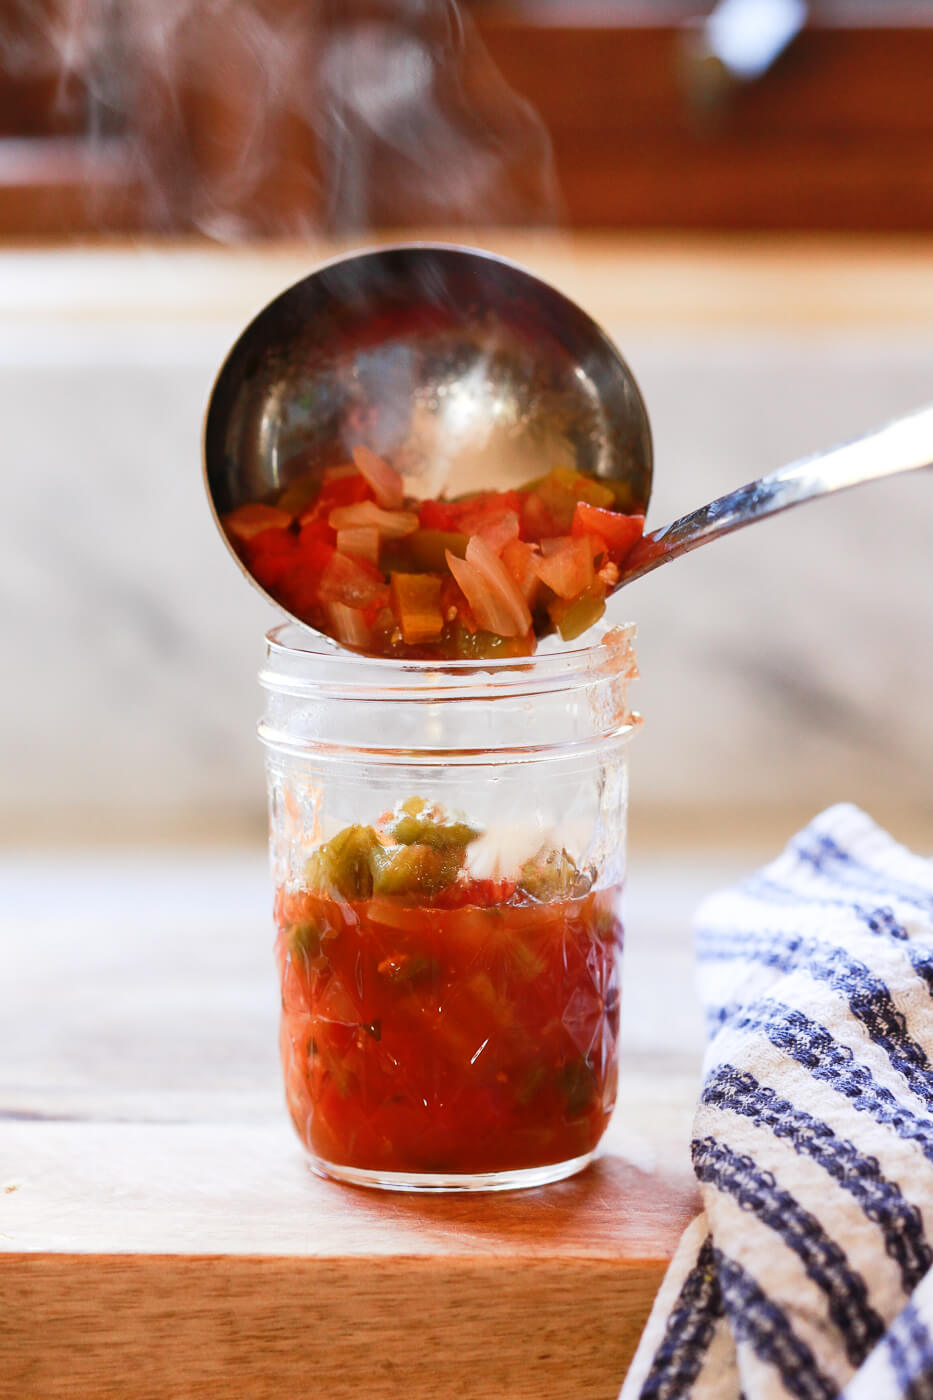 Hot canning salsa is ladled into a warm Ball canning jar.